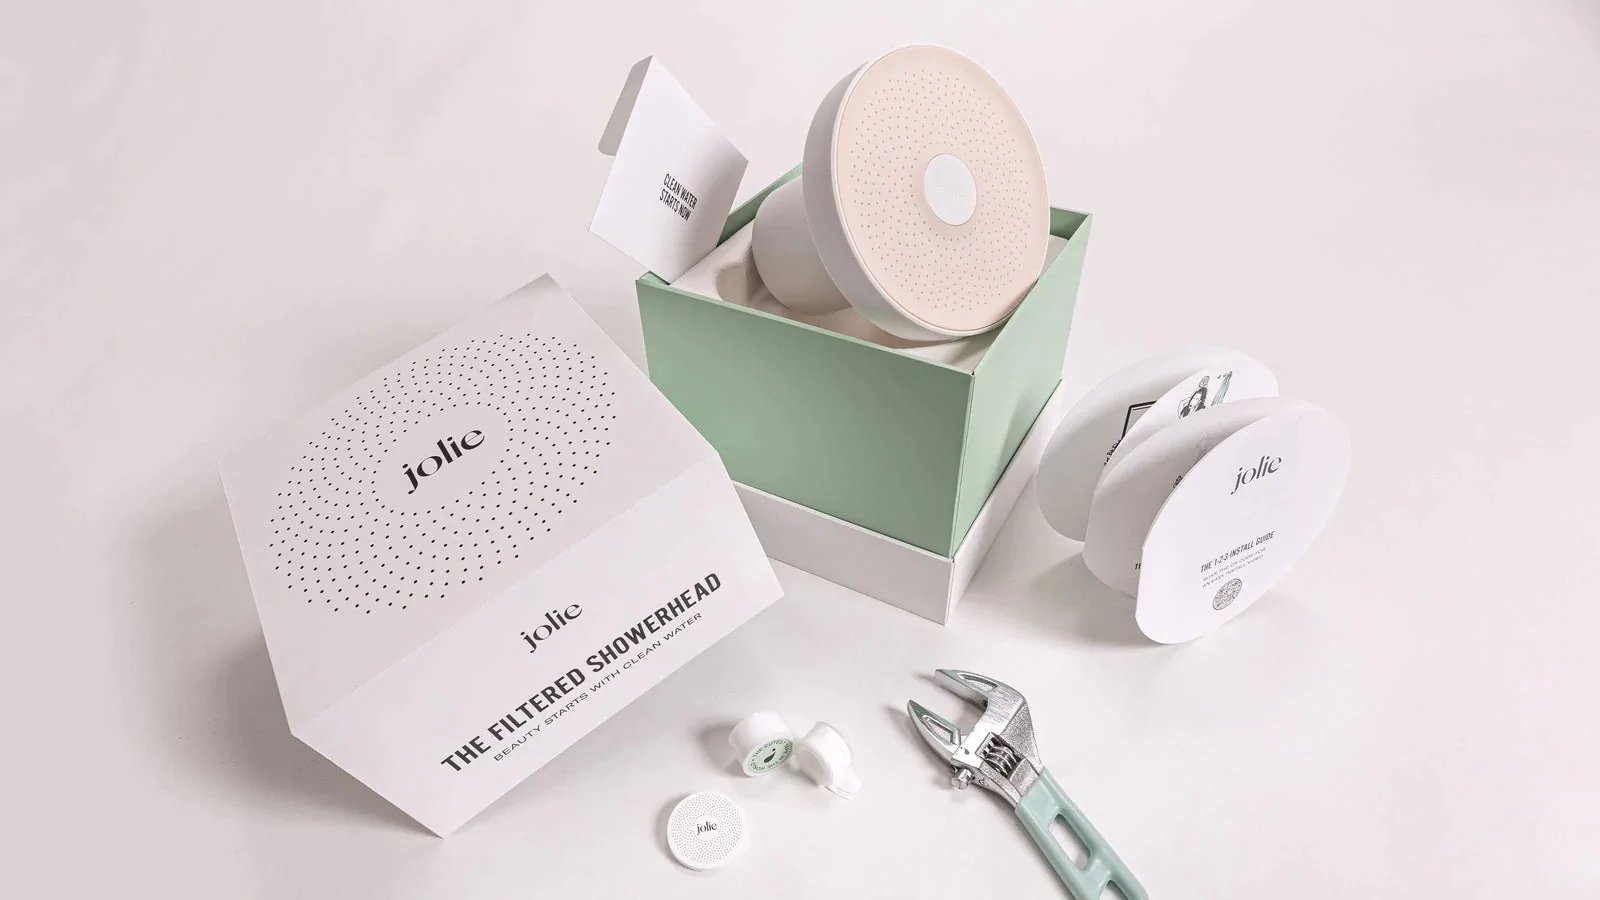 Jolie Filtered Showerhead improves well-being by removing contaminants from shower water